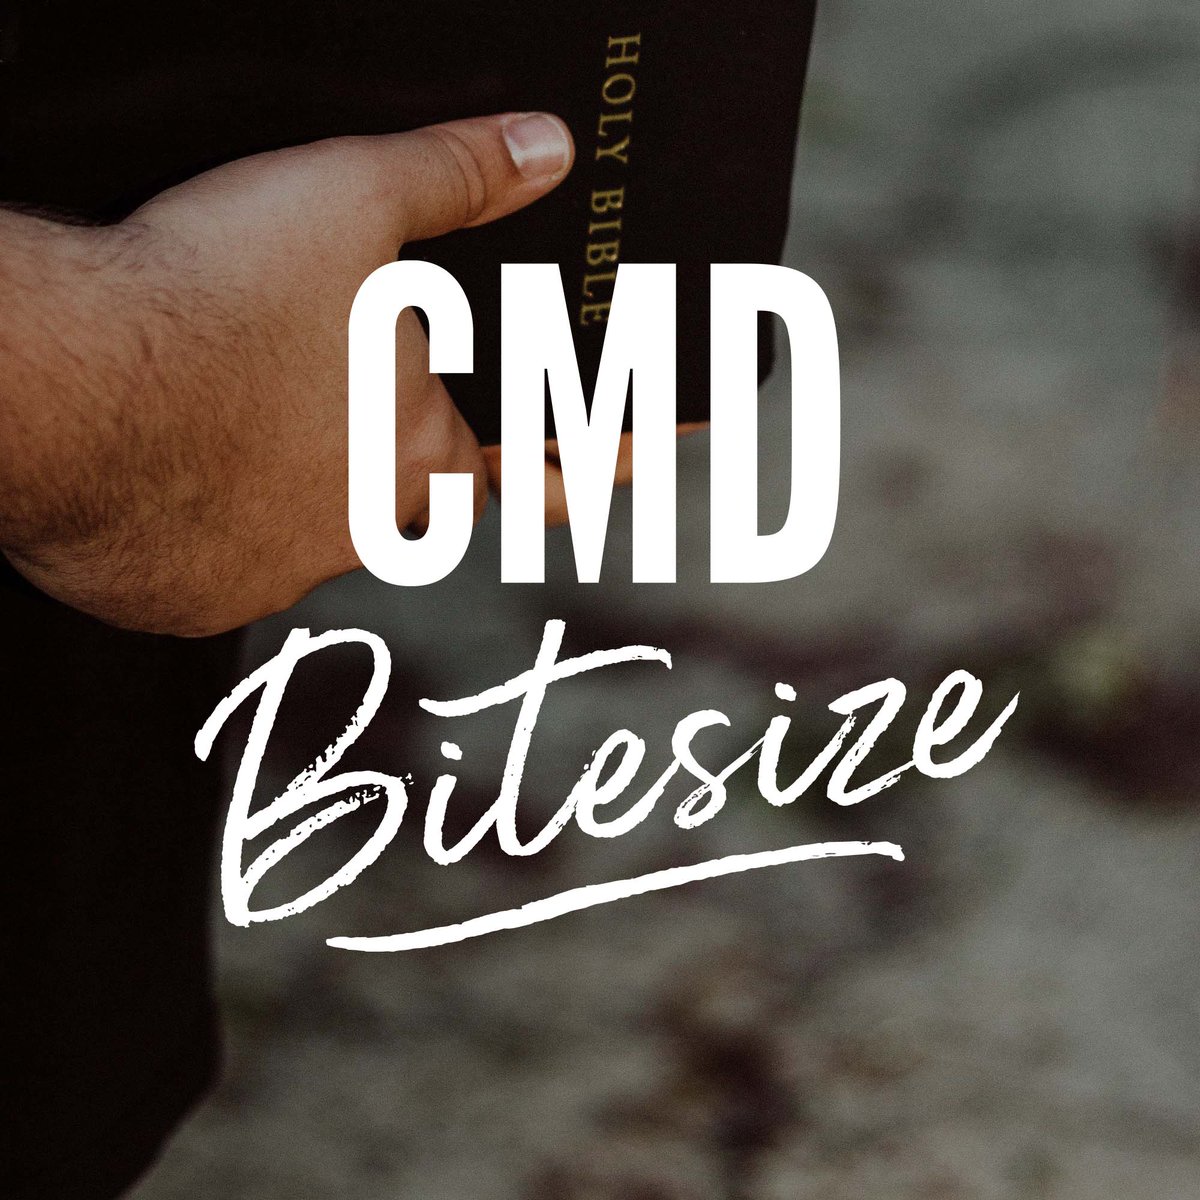 In the latest CMD Bitesize podcast, Revd Mark James about AI & the Church. Listen: trurodiocese.org.uk/podcast-series… Interested? Join an in-person CMD session lead by Mark on Wednesday, May 15, 9:30am – 12:30pm, Old Cathedral School, Truro. Book: bookwhen.com/trurodiocese#f… #AIandchurch #AI